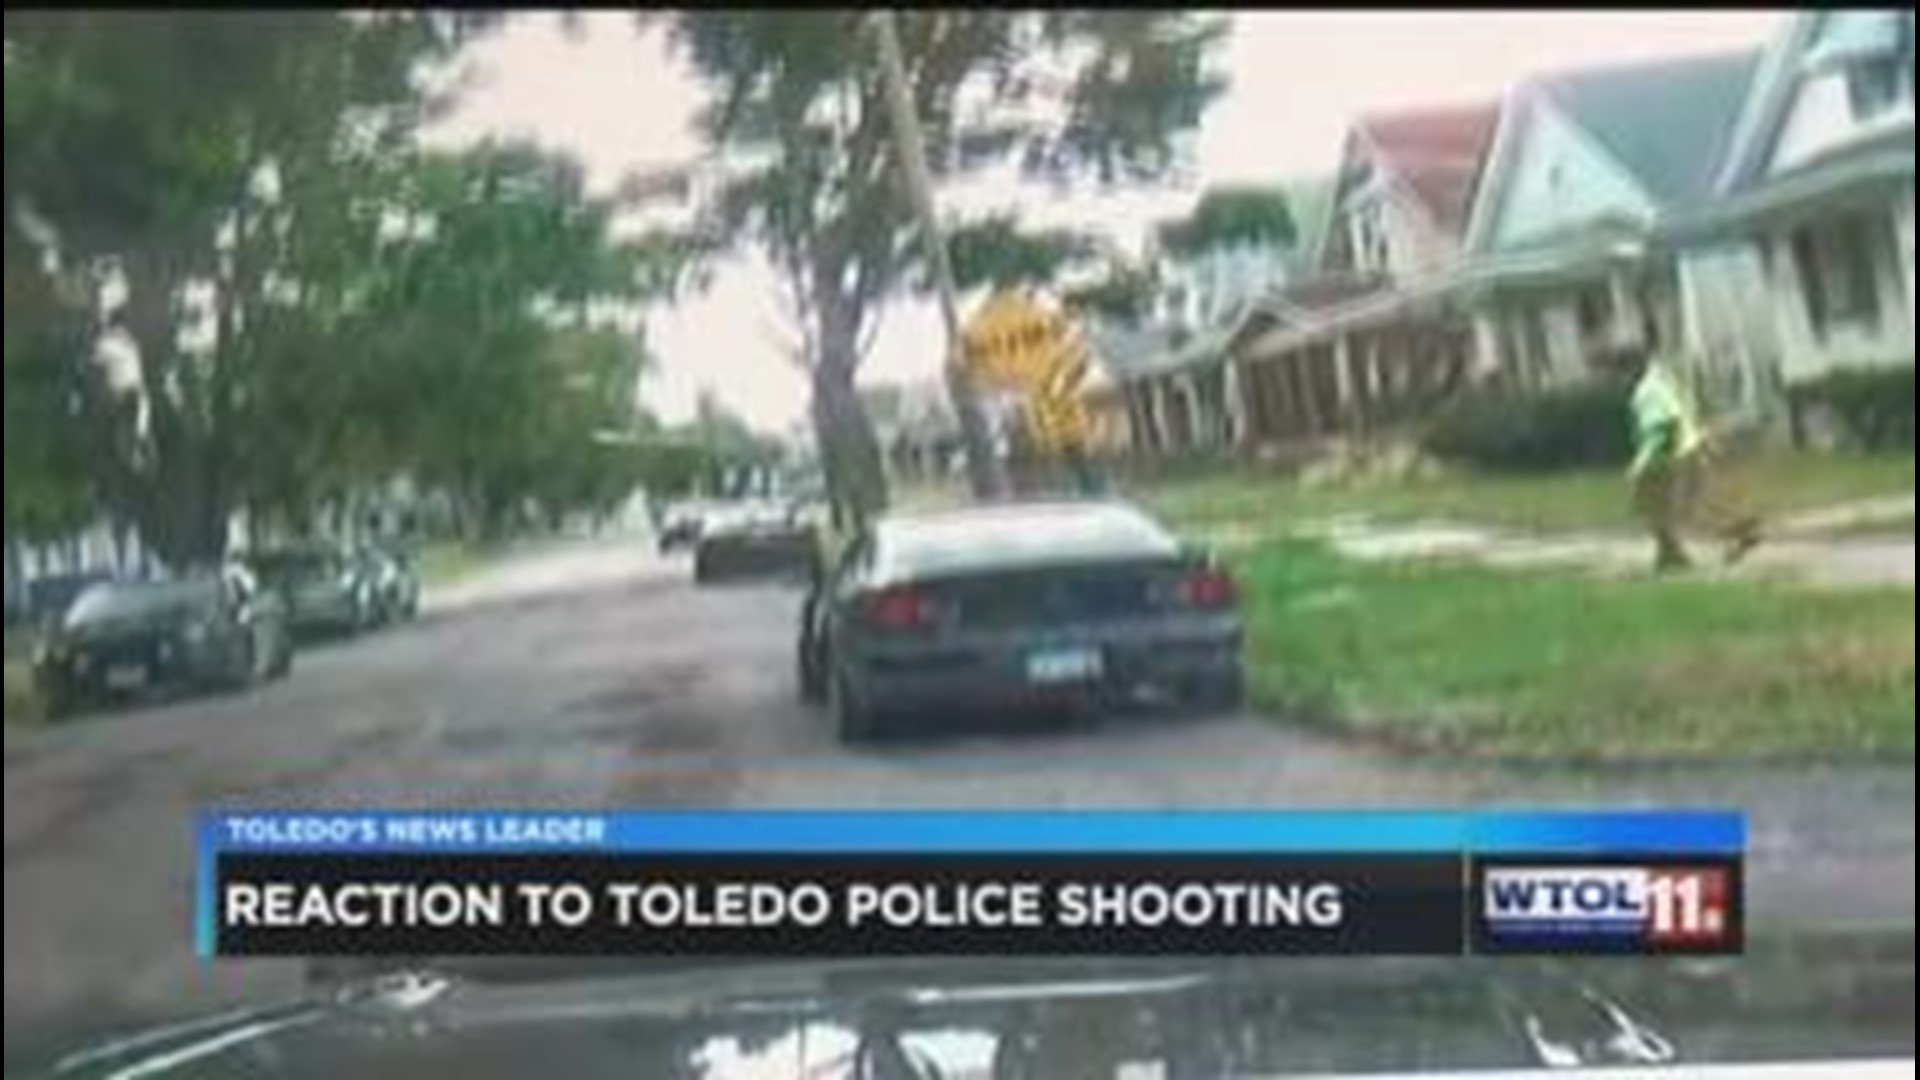 Neighbors say police shooting justified after seeing dash cam footage